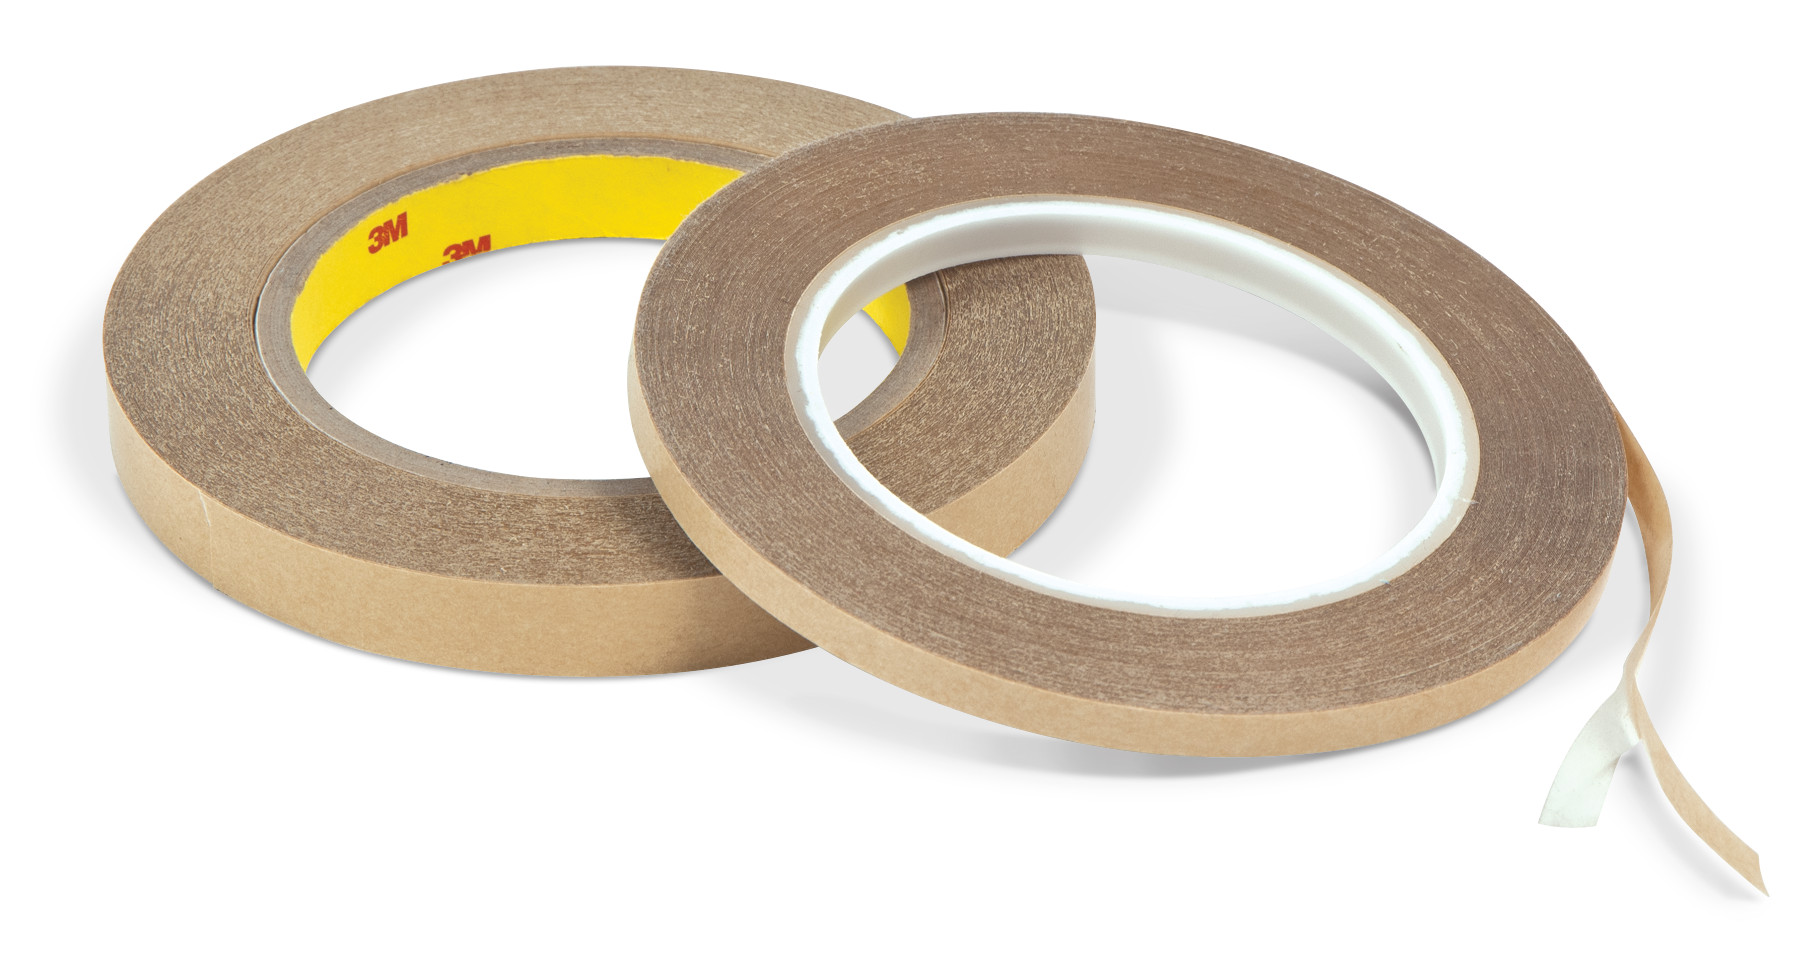 3M™ 415 Polyester Double-Sided Tape (36 yds.), Tape, Conservation  Supplies, Preservation